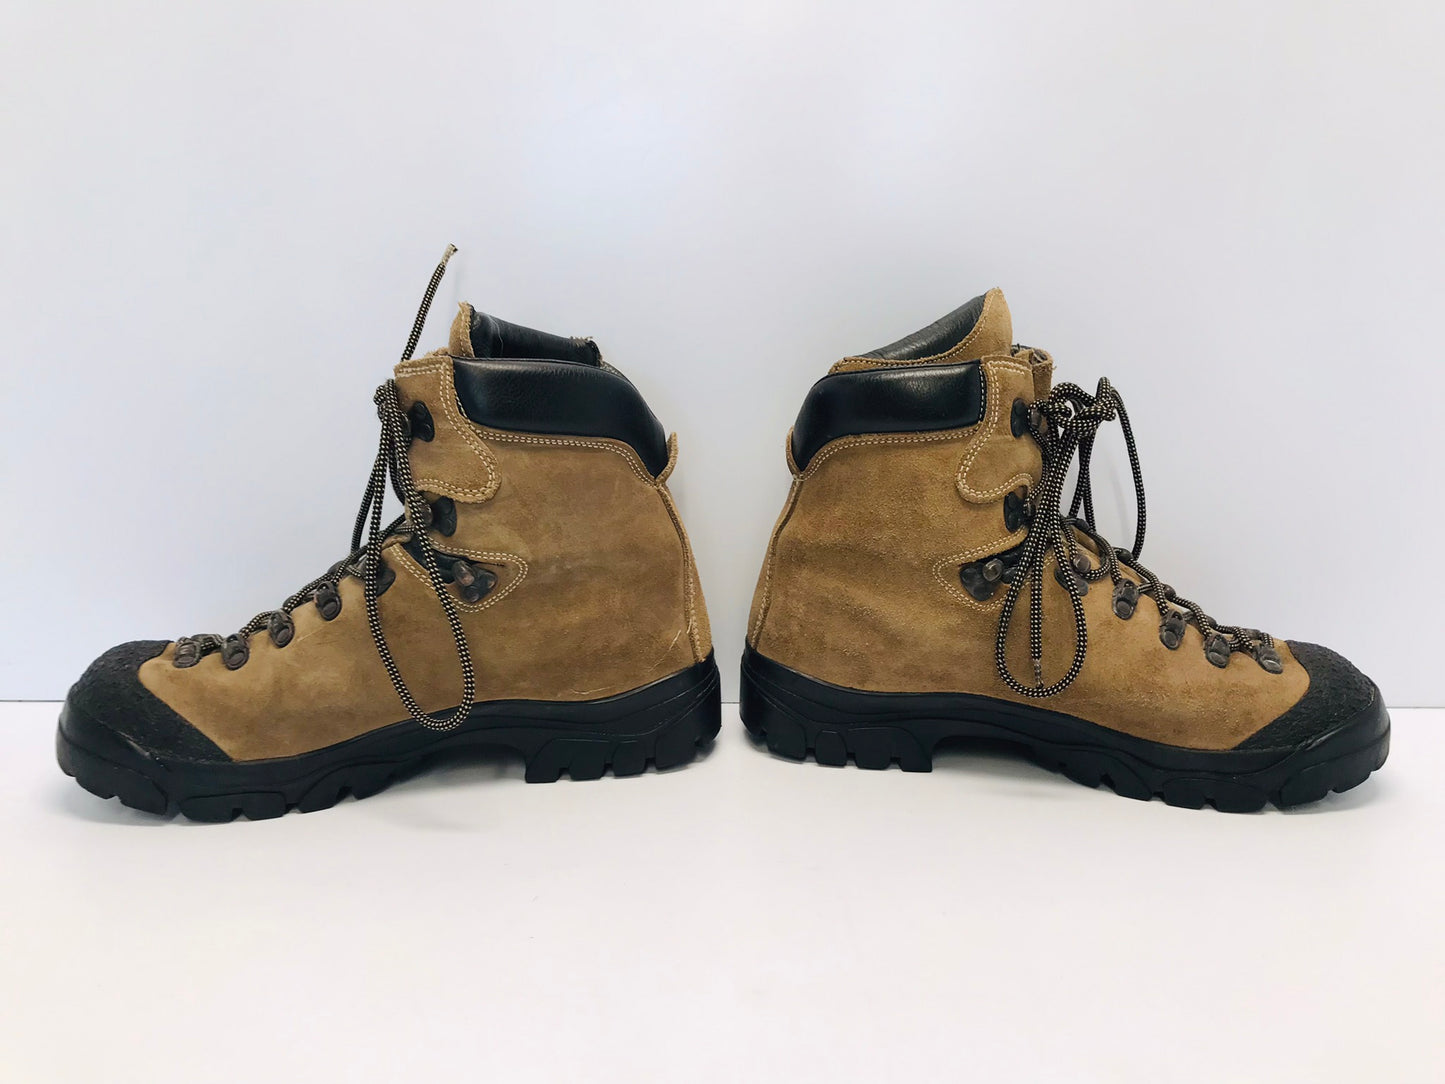 Hiking Boots Men's Size 9.5 Vibram Leather Suade Boots Outstanding Quality